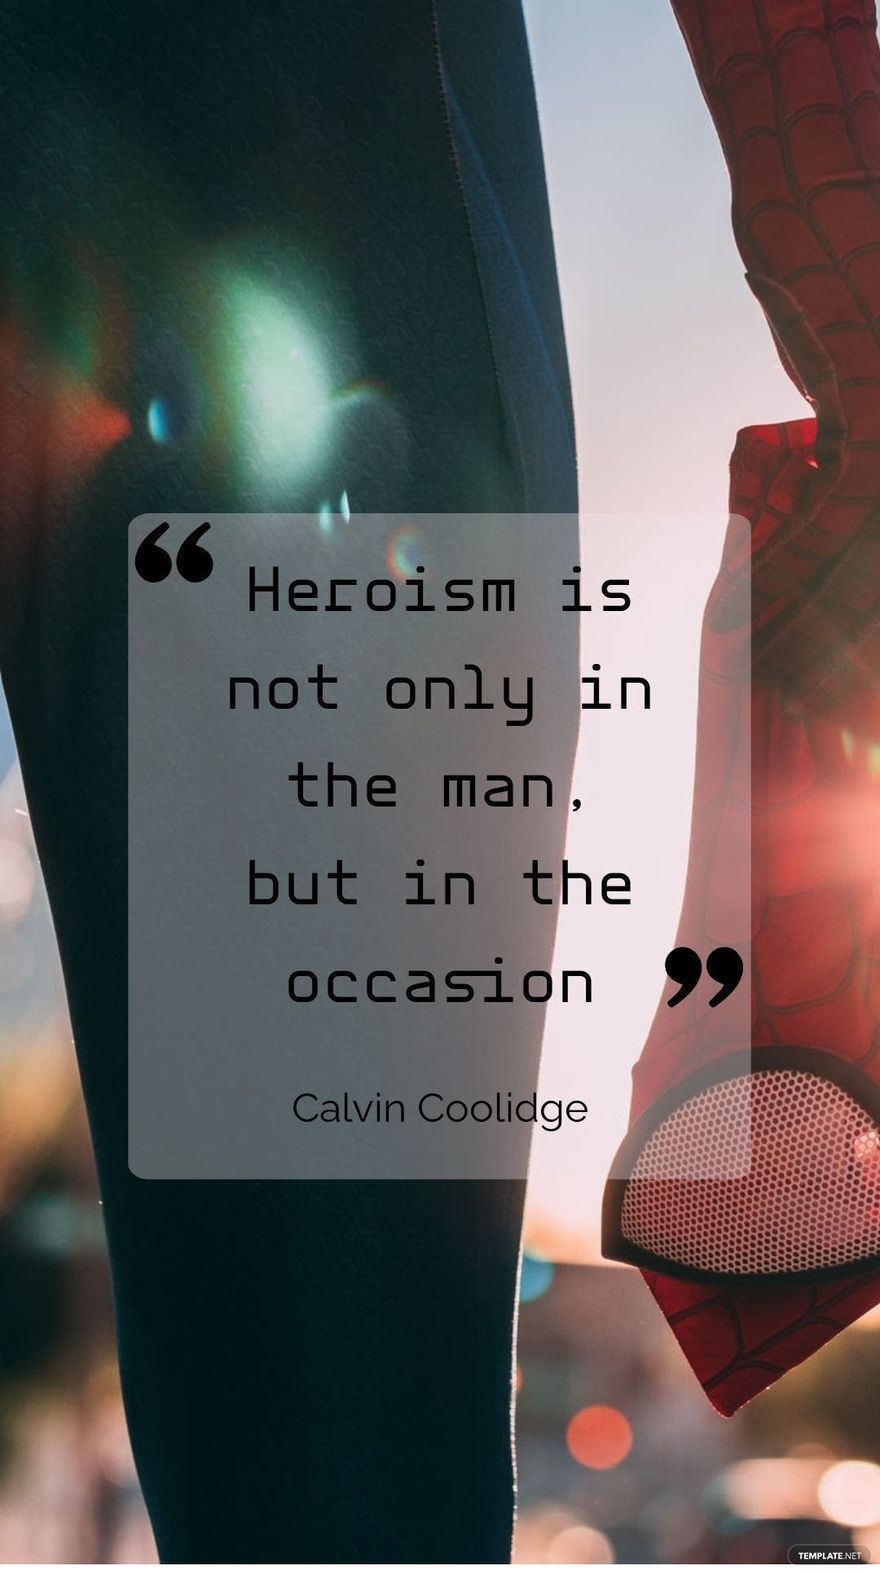 Free Calvin Coolidge - Heroism is not only in the man, but in the occasion